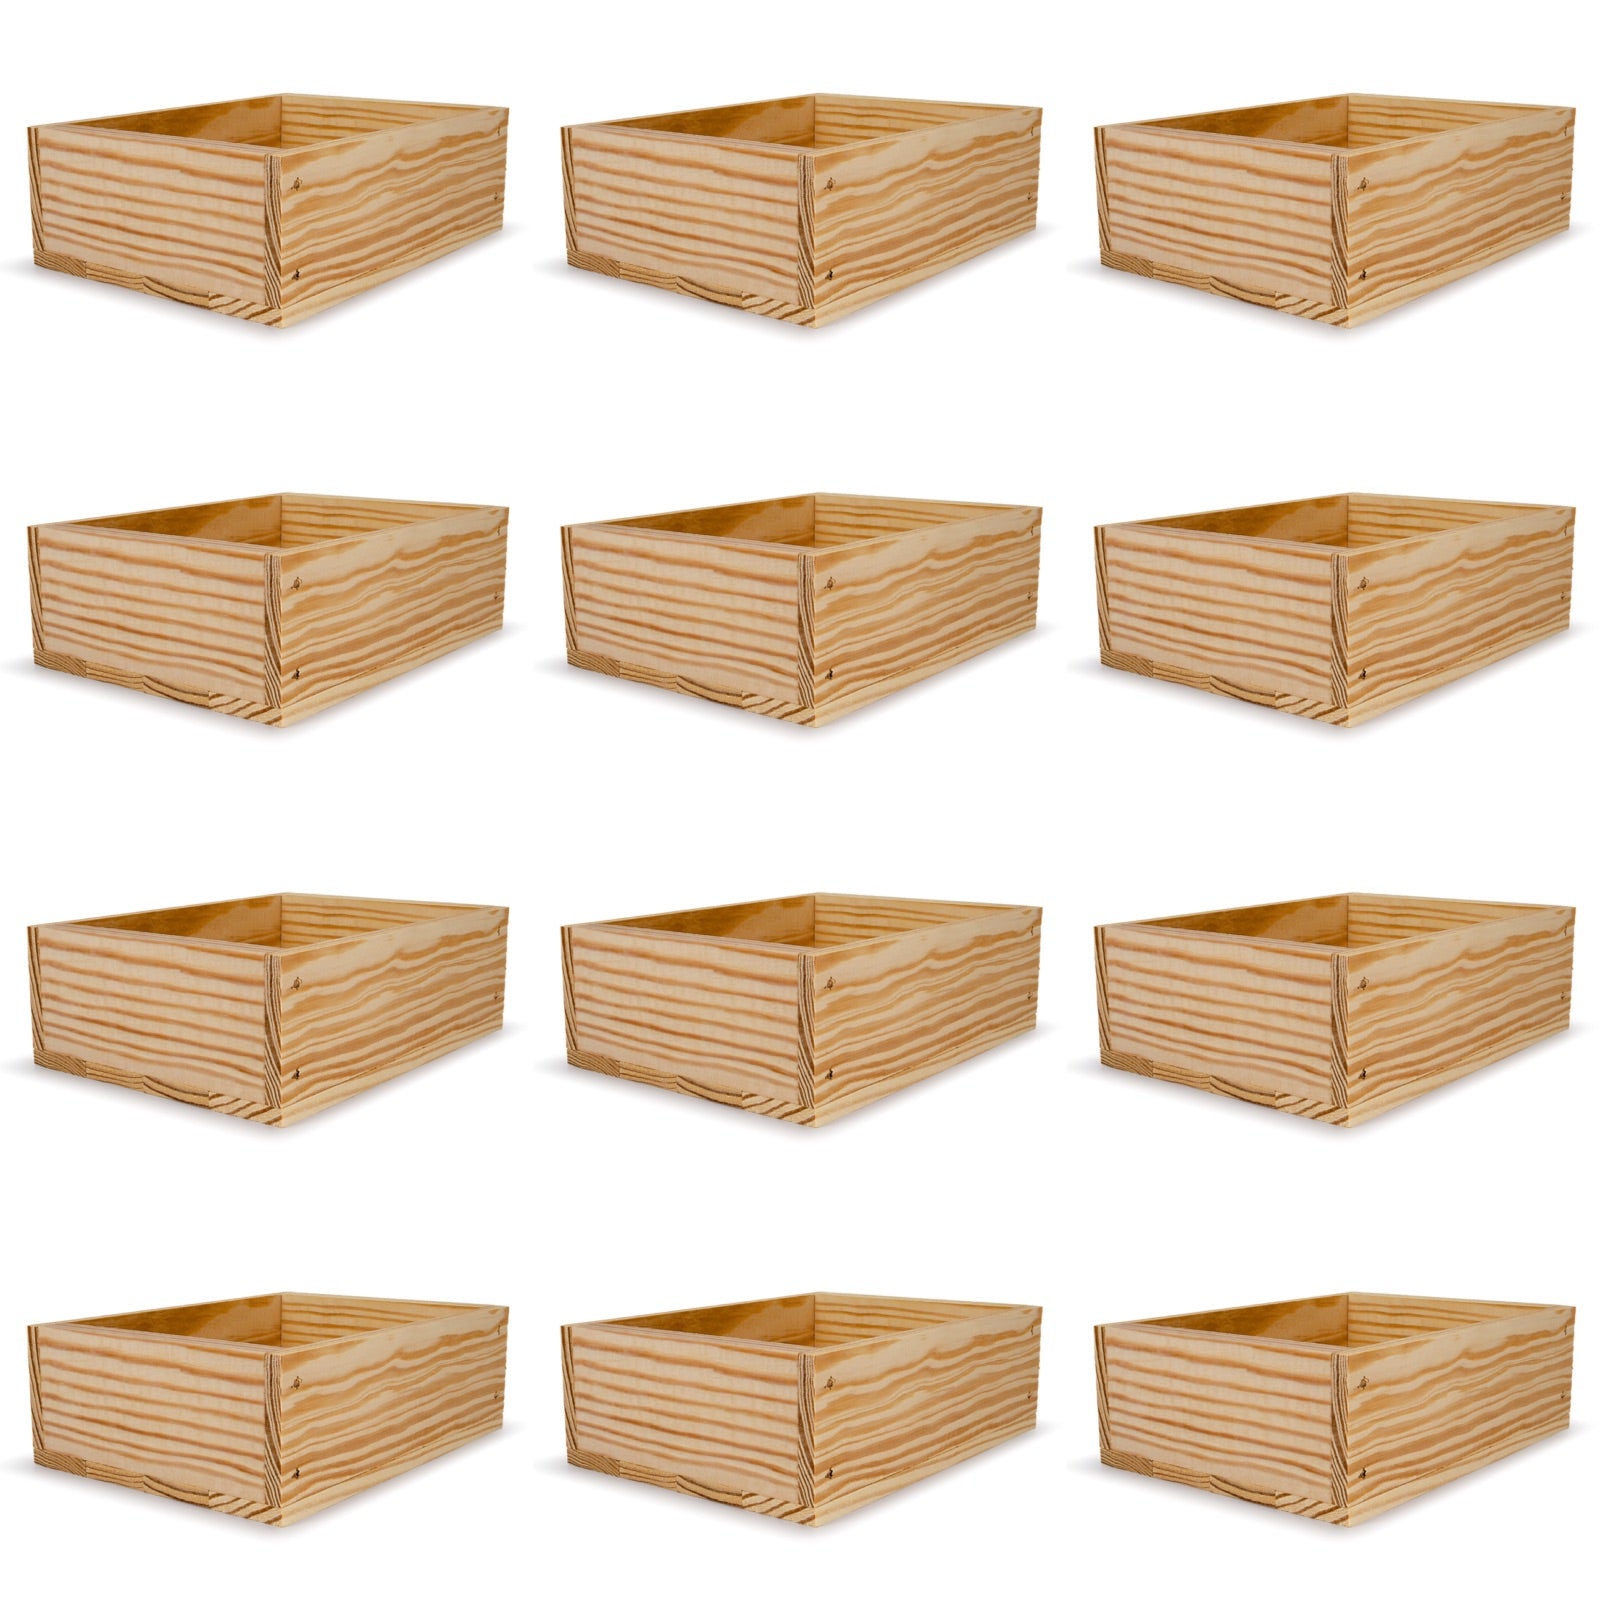 12 Small wooden crates 8x6.25x2.75